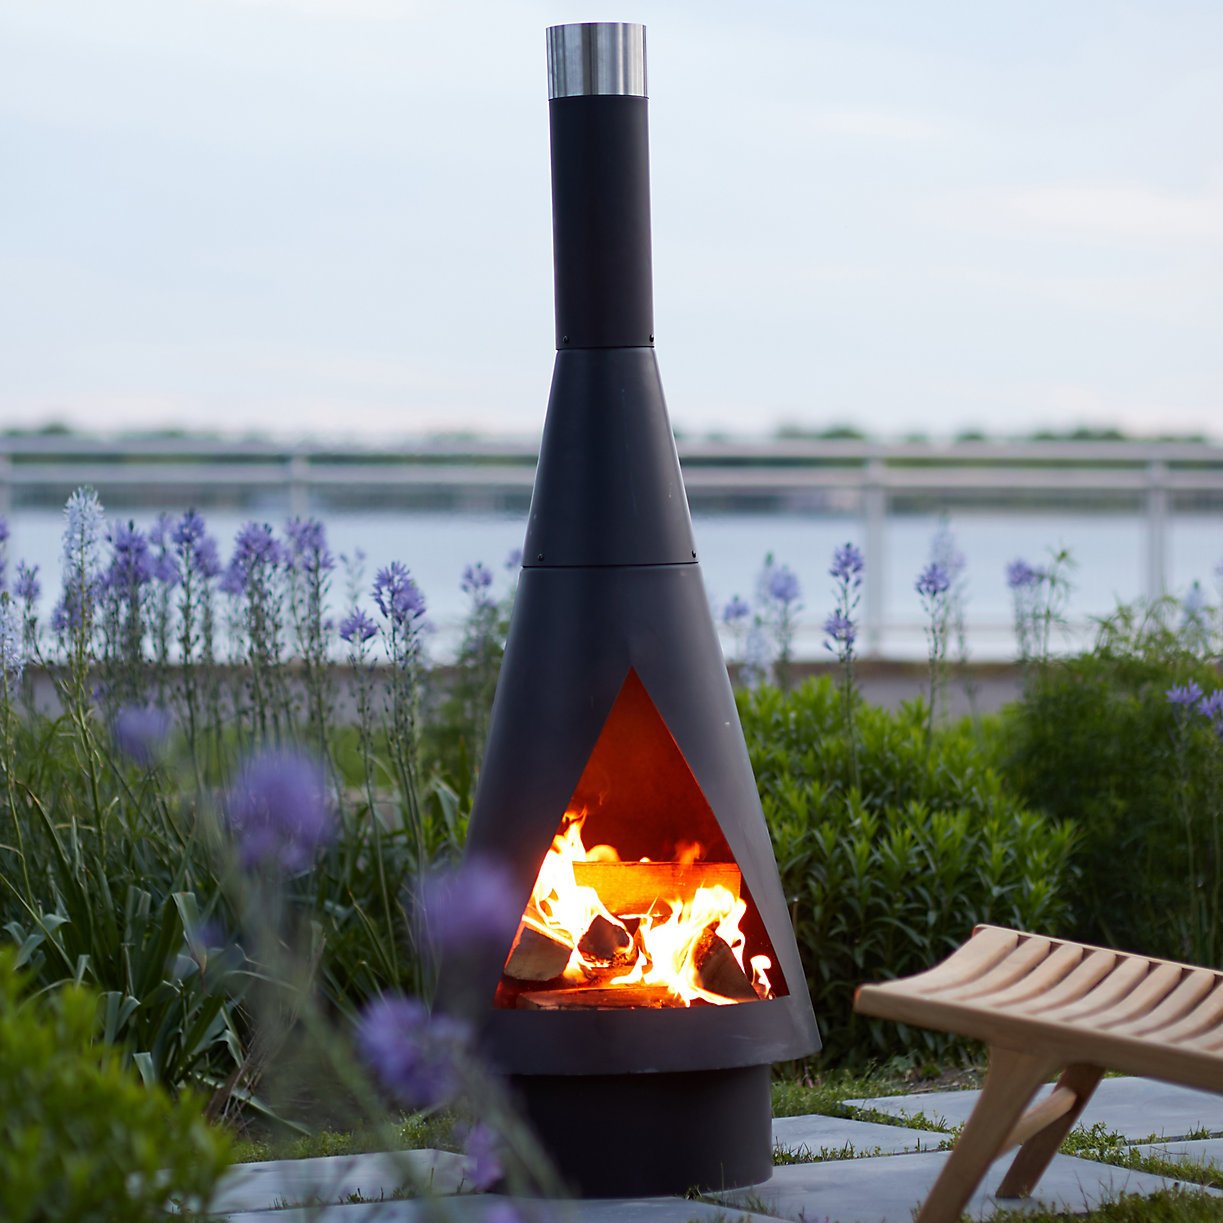 Terrain Angled Obelisk Chiminea - Go up with this elevated, geometric chiminea. Welded from a single piece of weathering steel, this timeless wood-burning outdoor fireplace will develop a beautiful patina over time. SHOP NOW >” loading=”lazy”></noscript><br/><img loading=